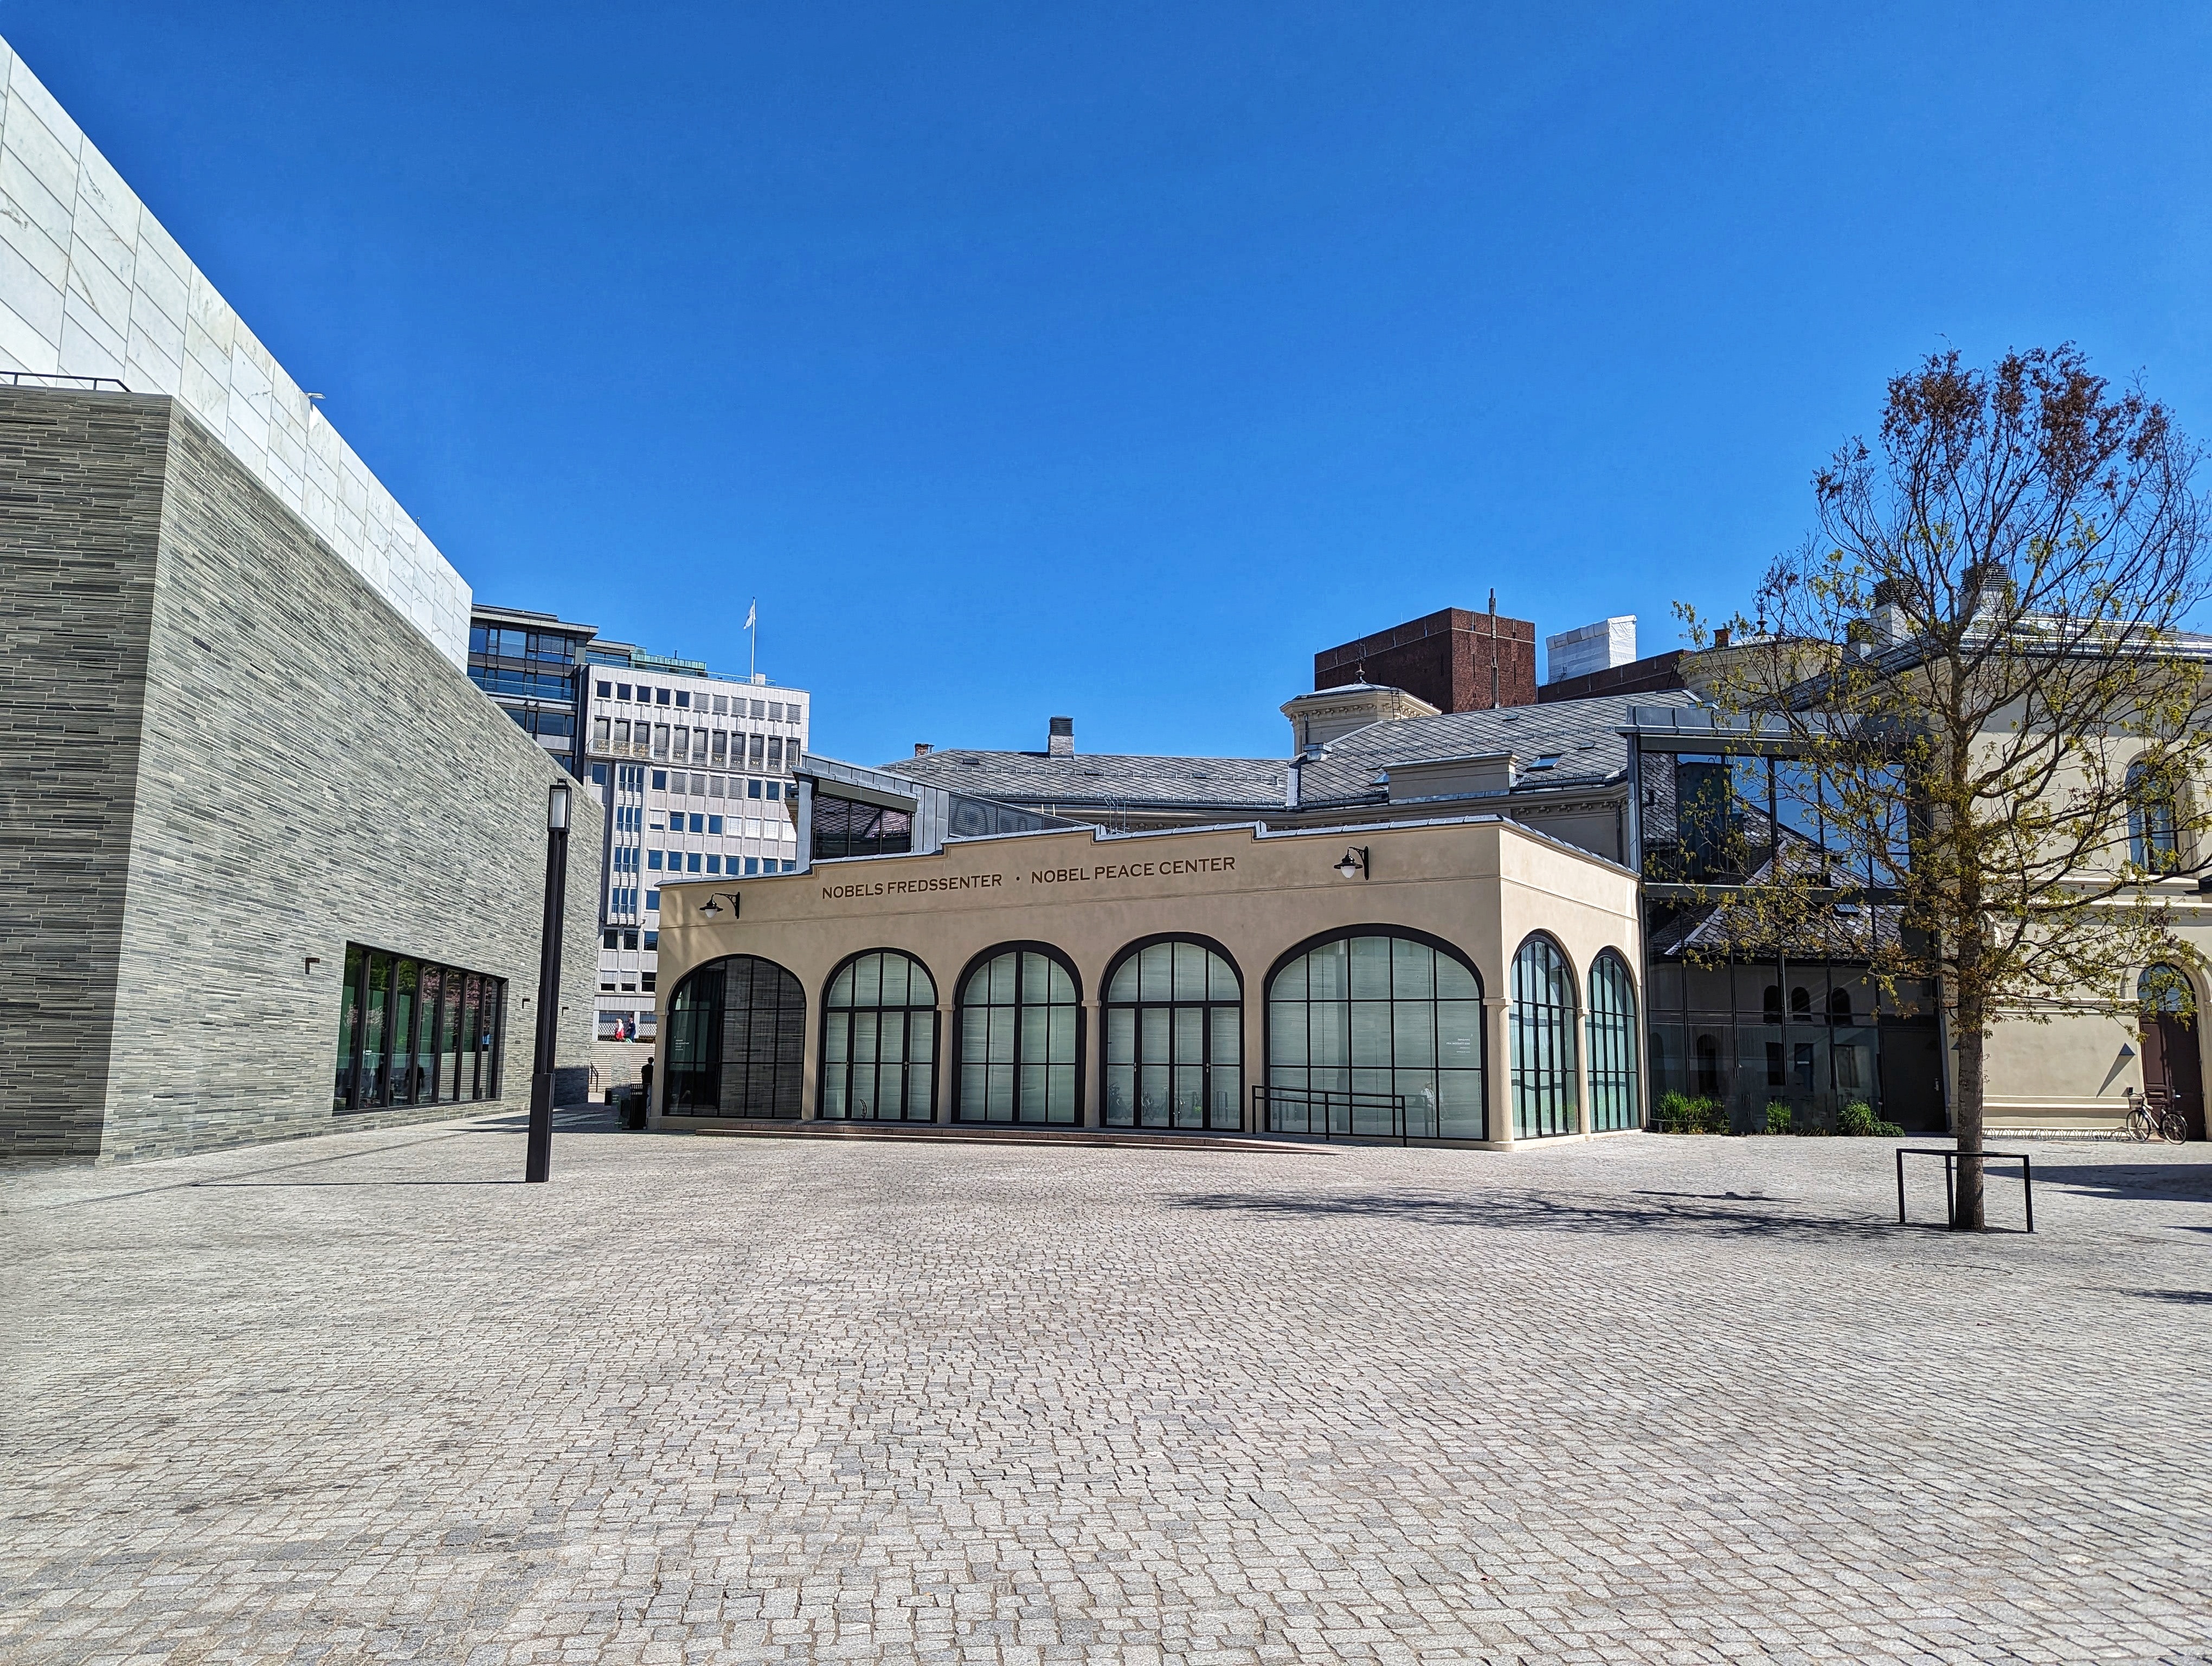 The National Museum courtyard in Oslo, Norway